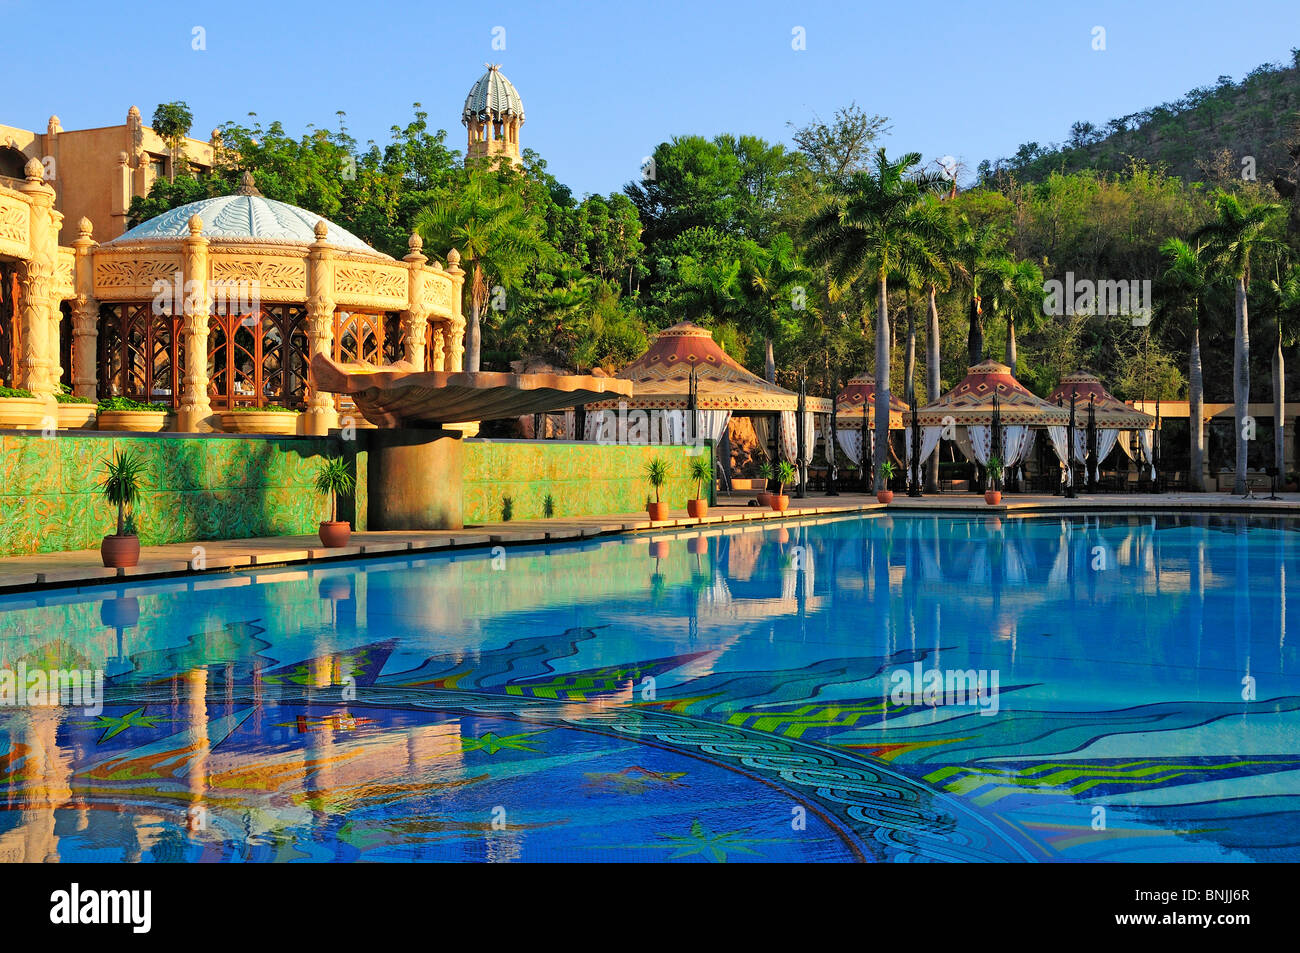 Pool at The Palace of the Lost City Sun city Entertainment Theme park North West South Africa Stock Photo